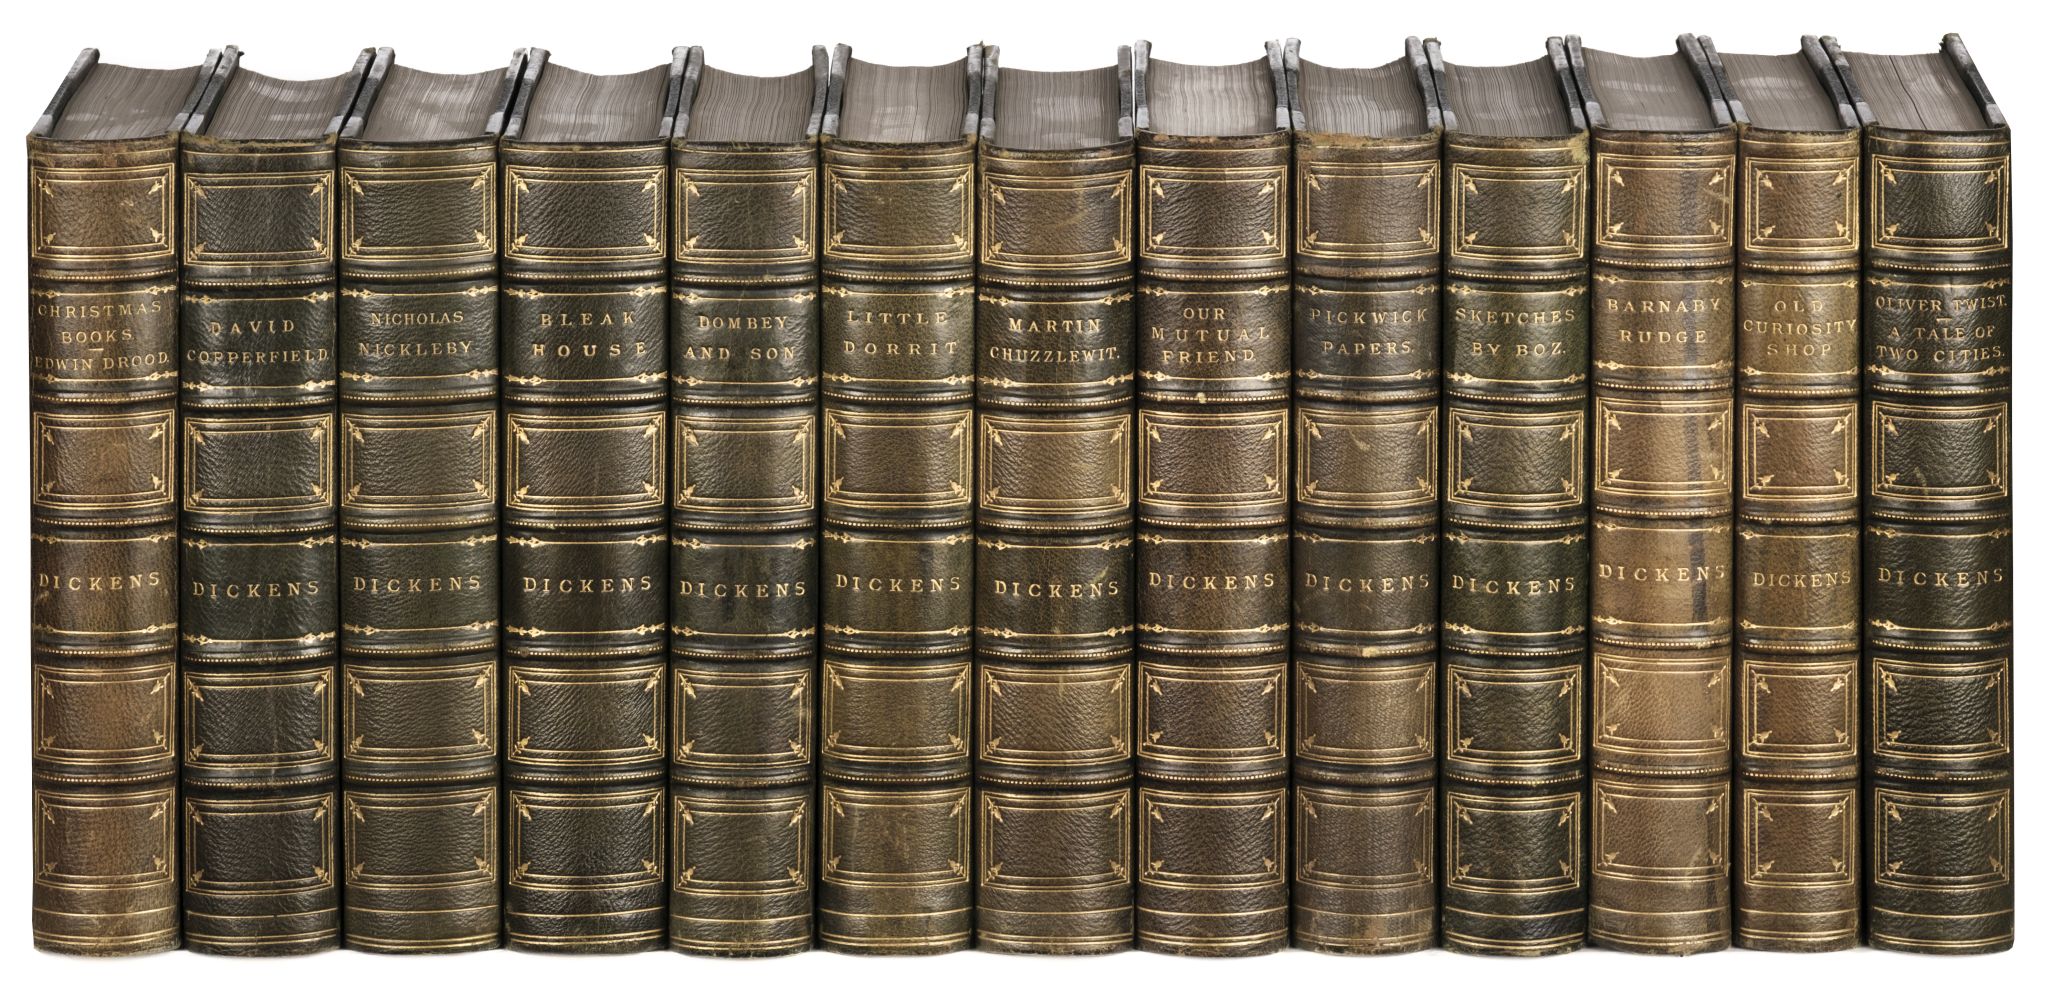 Dickens (Charles). Works, 18 works bound in 13 volumes, Chapman & Hall, circa 1880